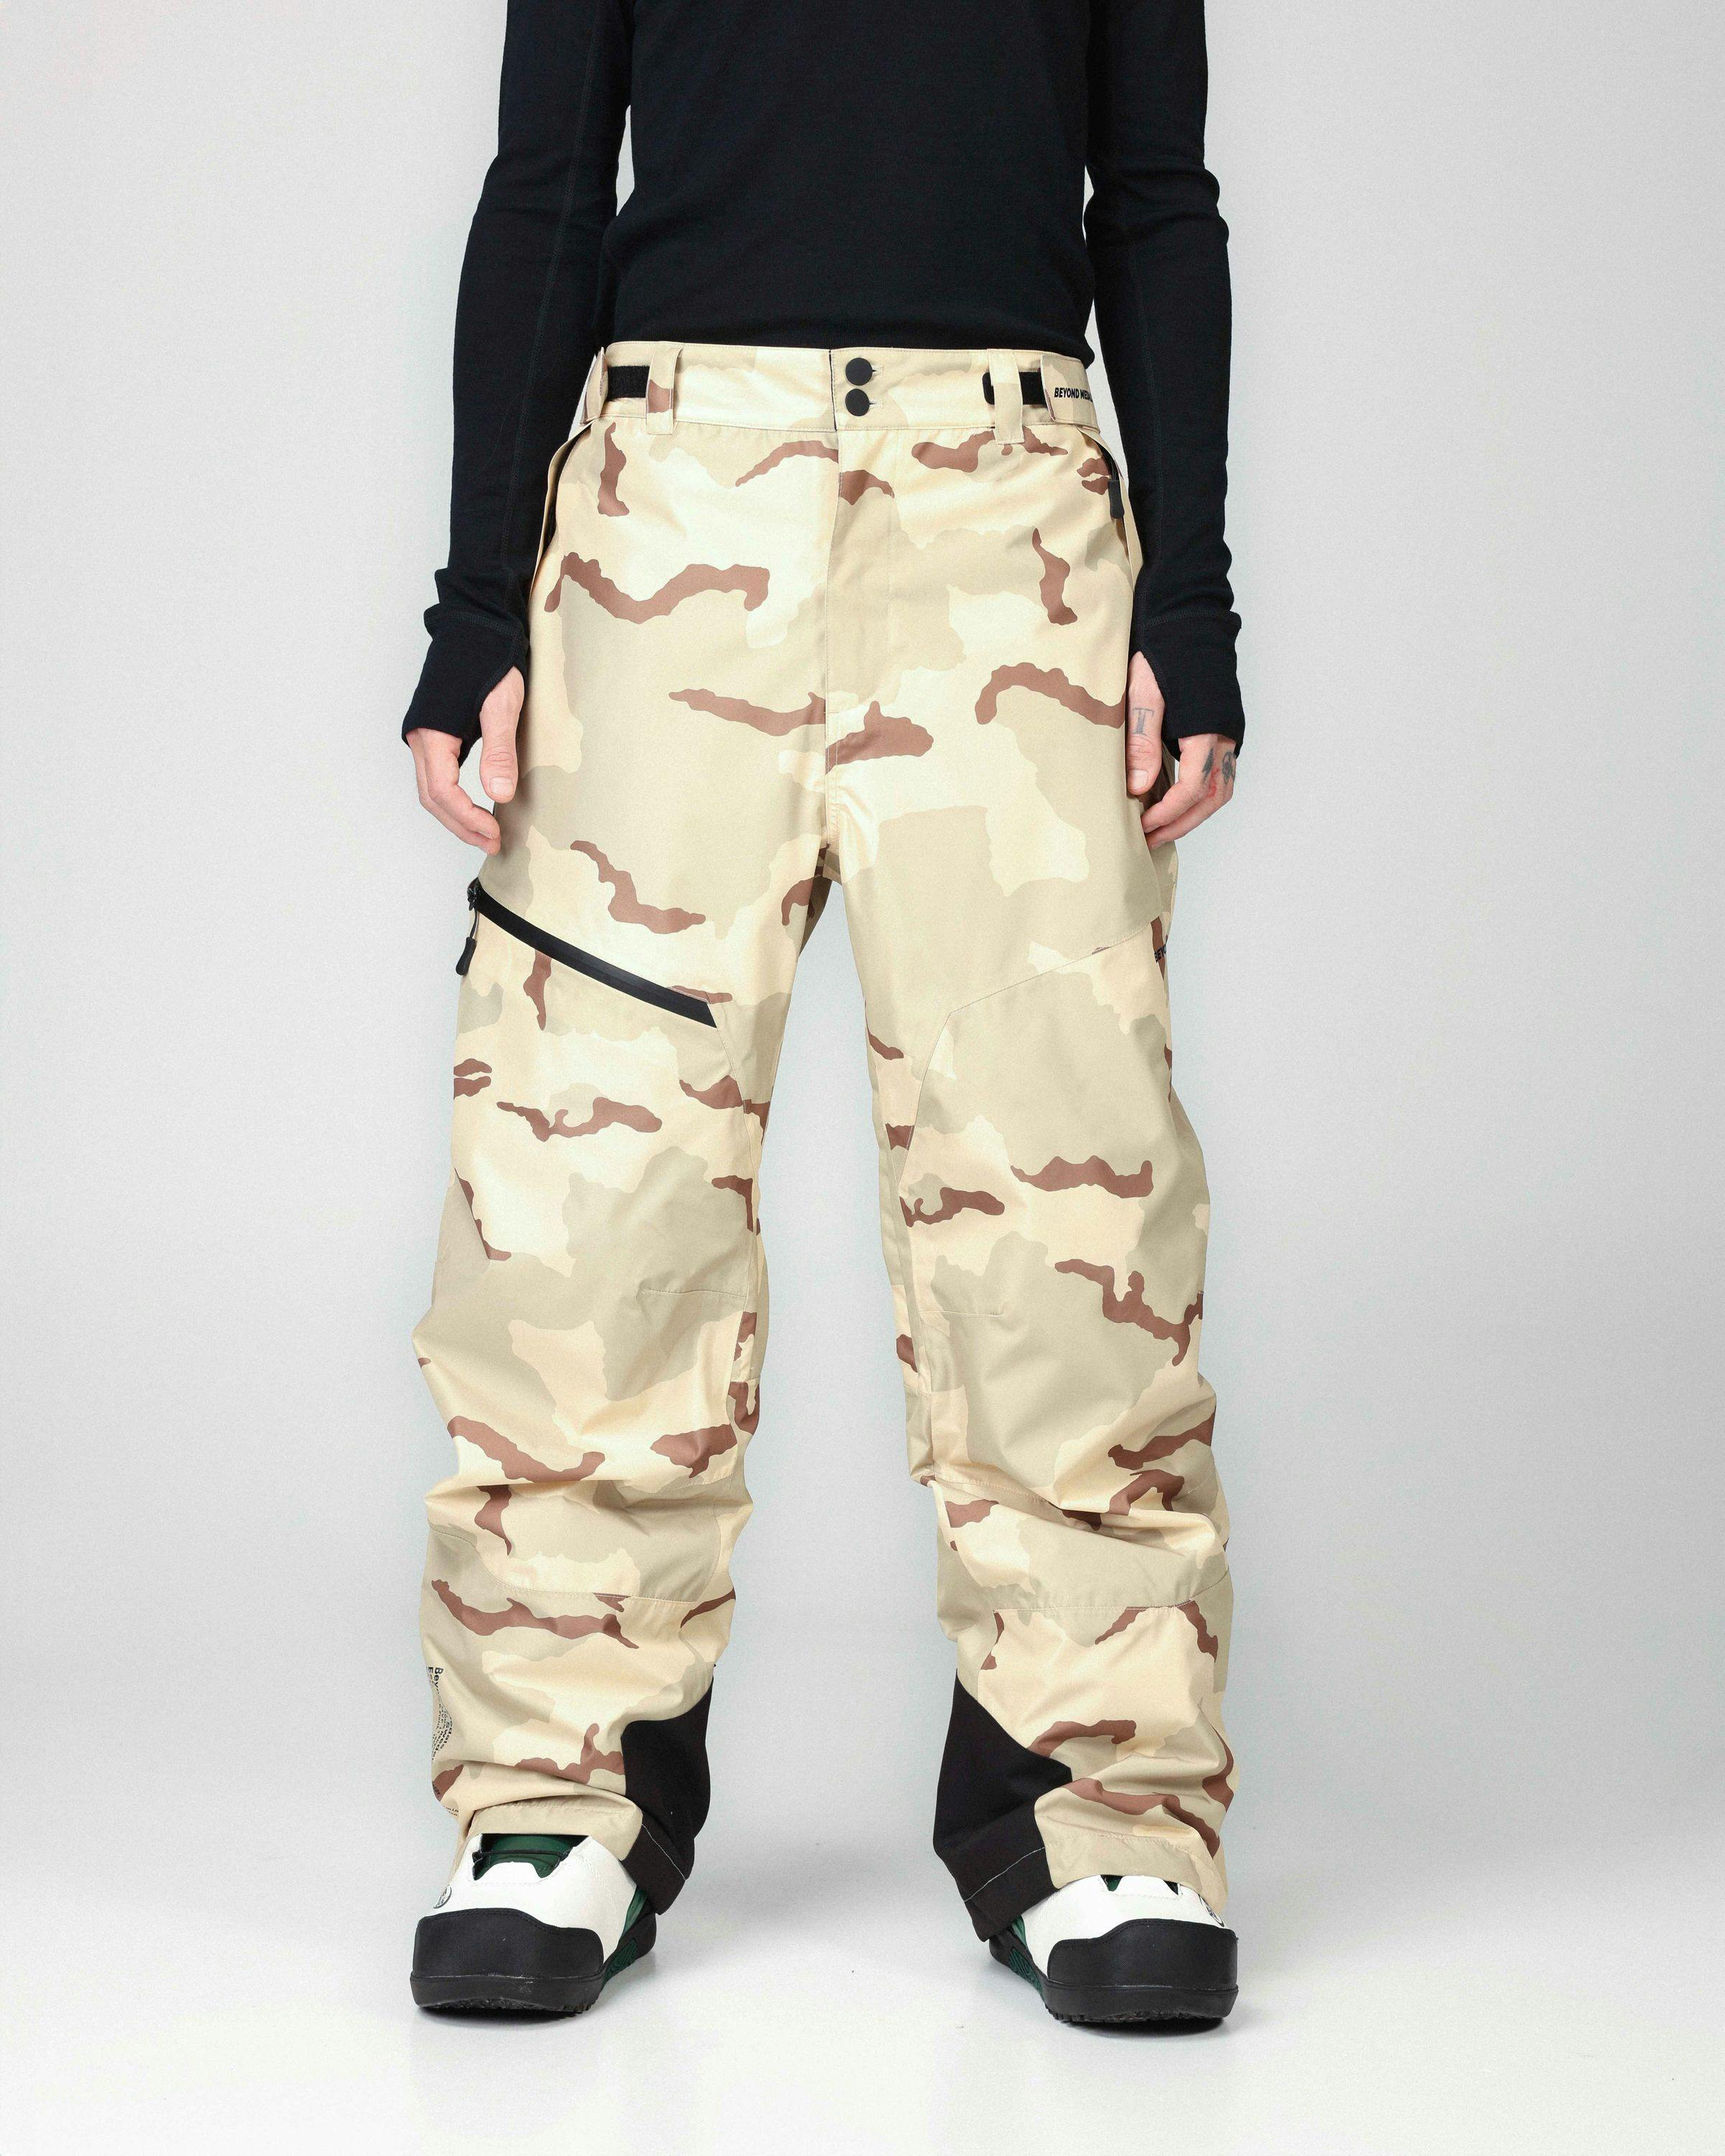 All-Terrain Canvas Field Pant  Avedon & Colby International Outfitters